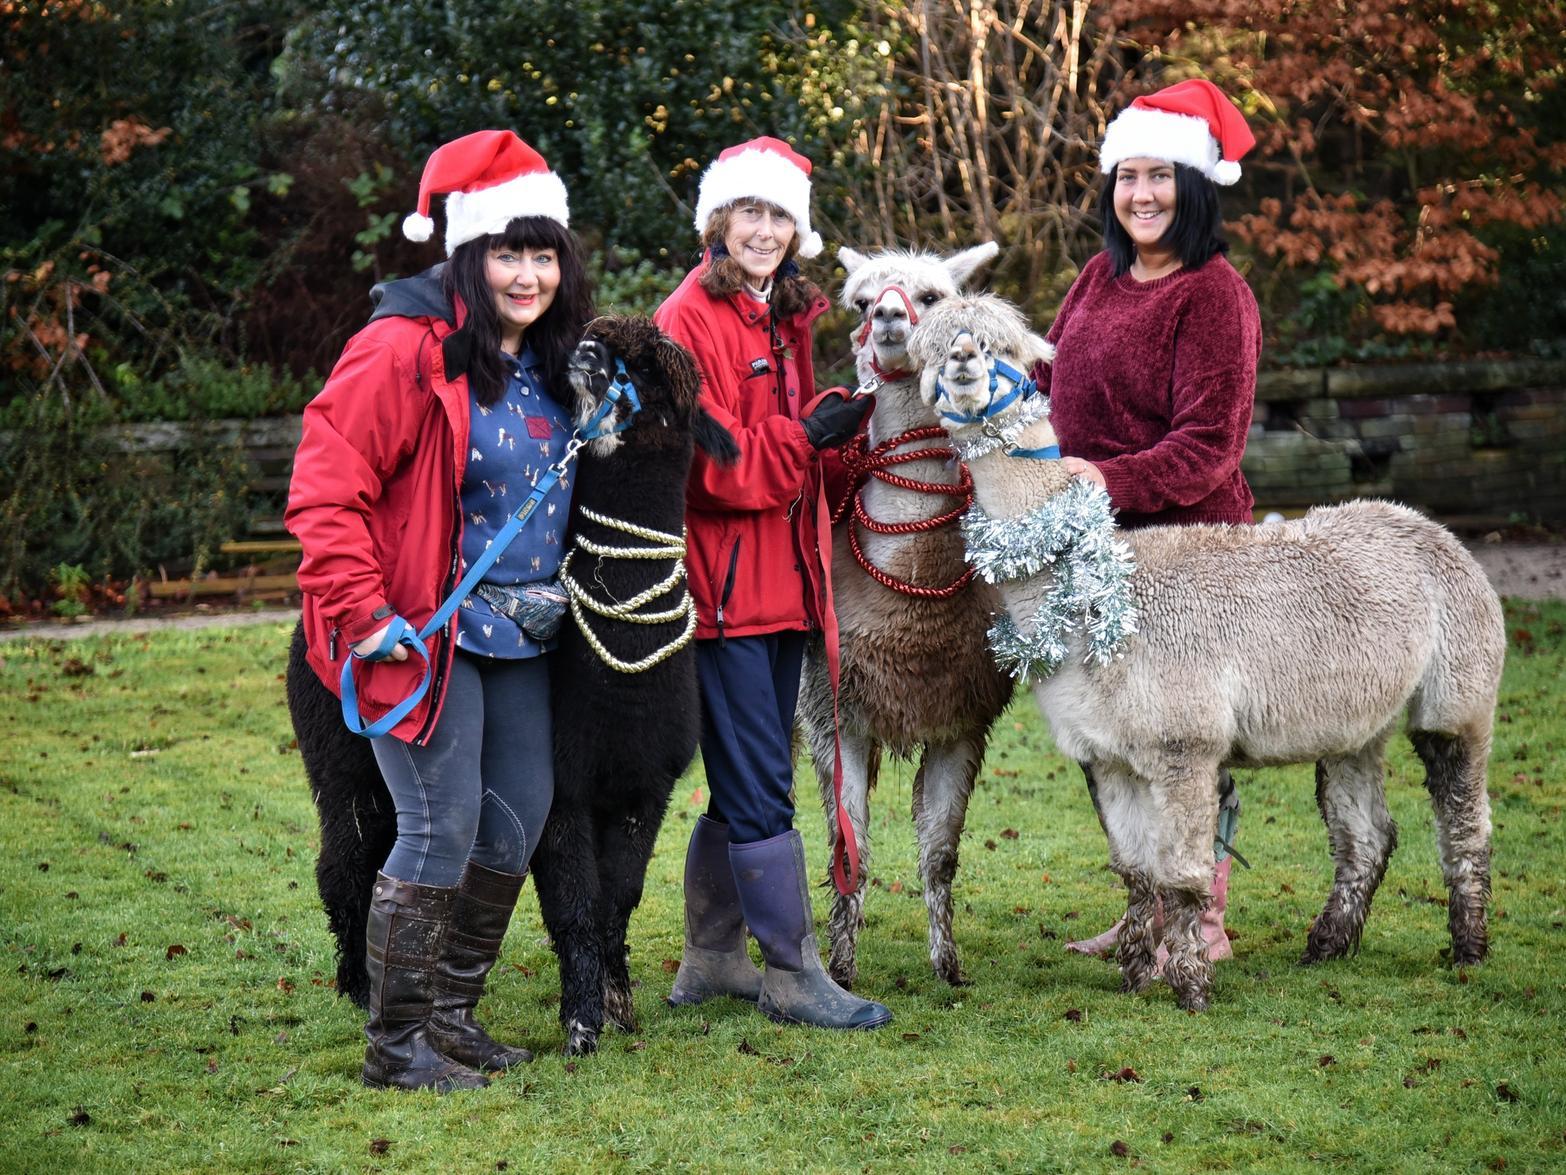 Helen Connor, Judy Ainley and Charlie Slater of Ivy Dene Alpacas pictured with Willow, Bella and Freya